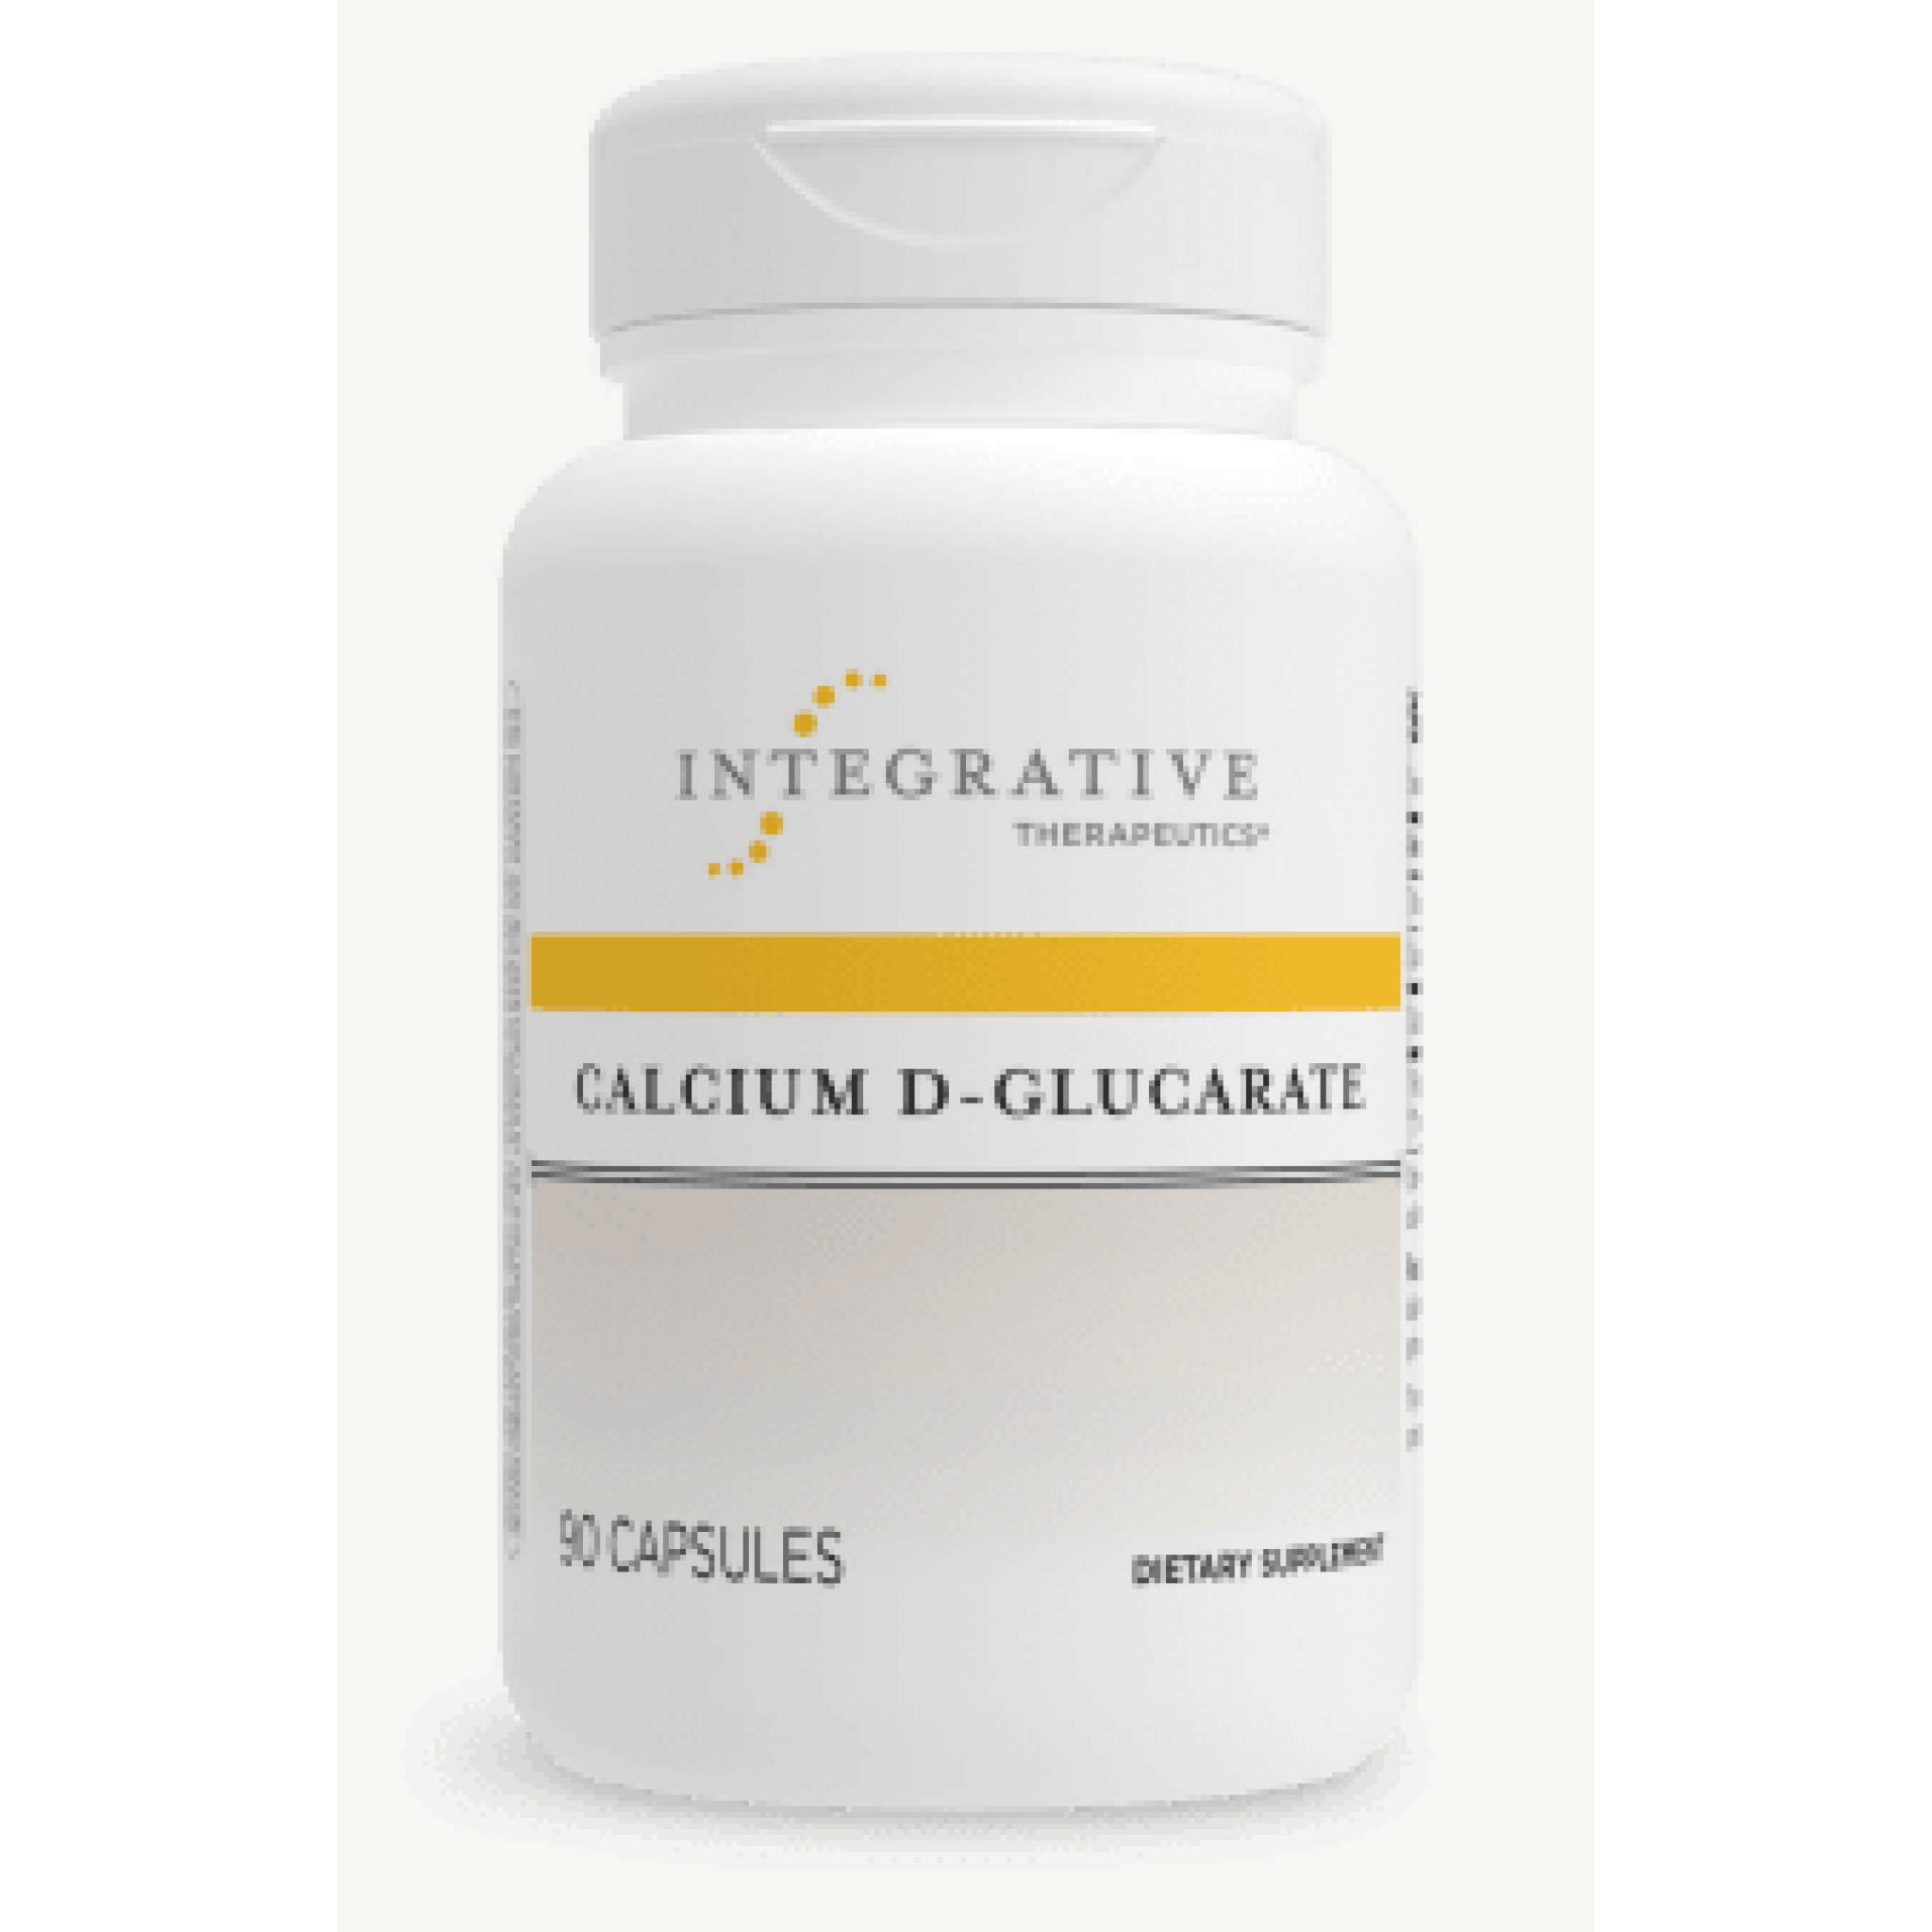 Integrative Therapy - Calcium D Glucarate 500 mg